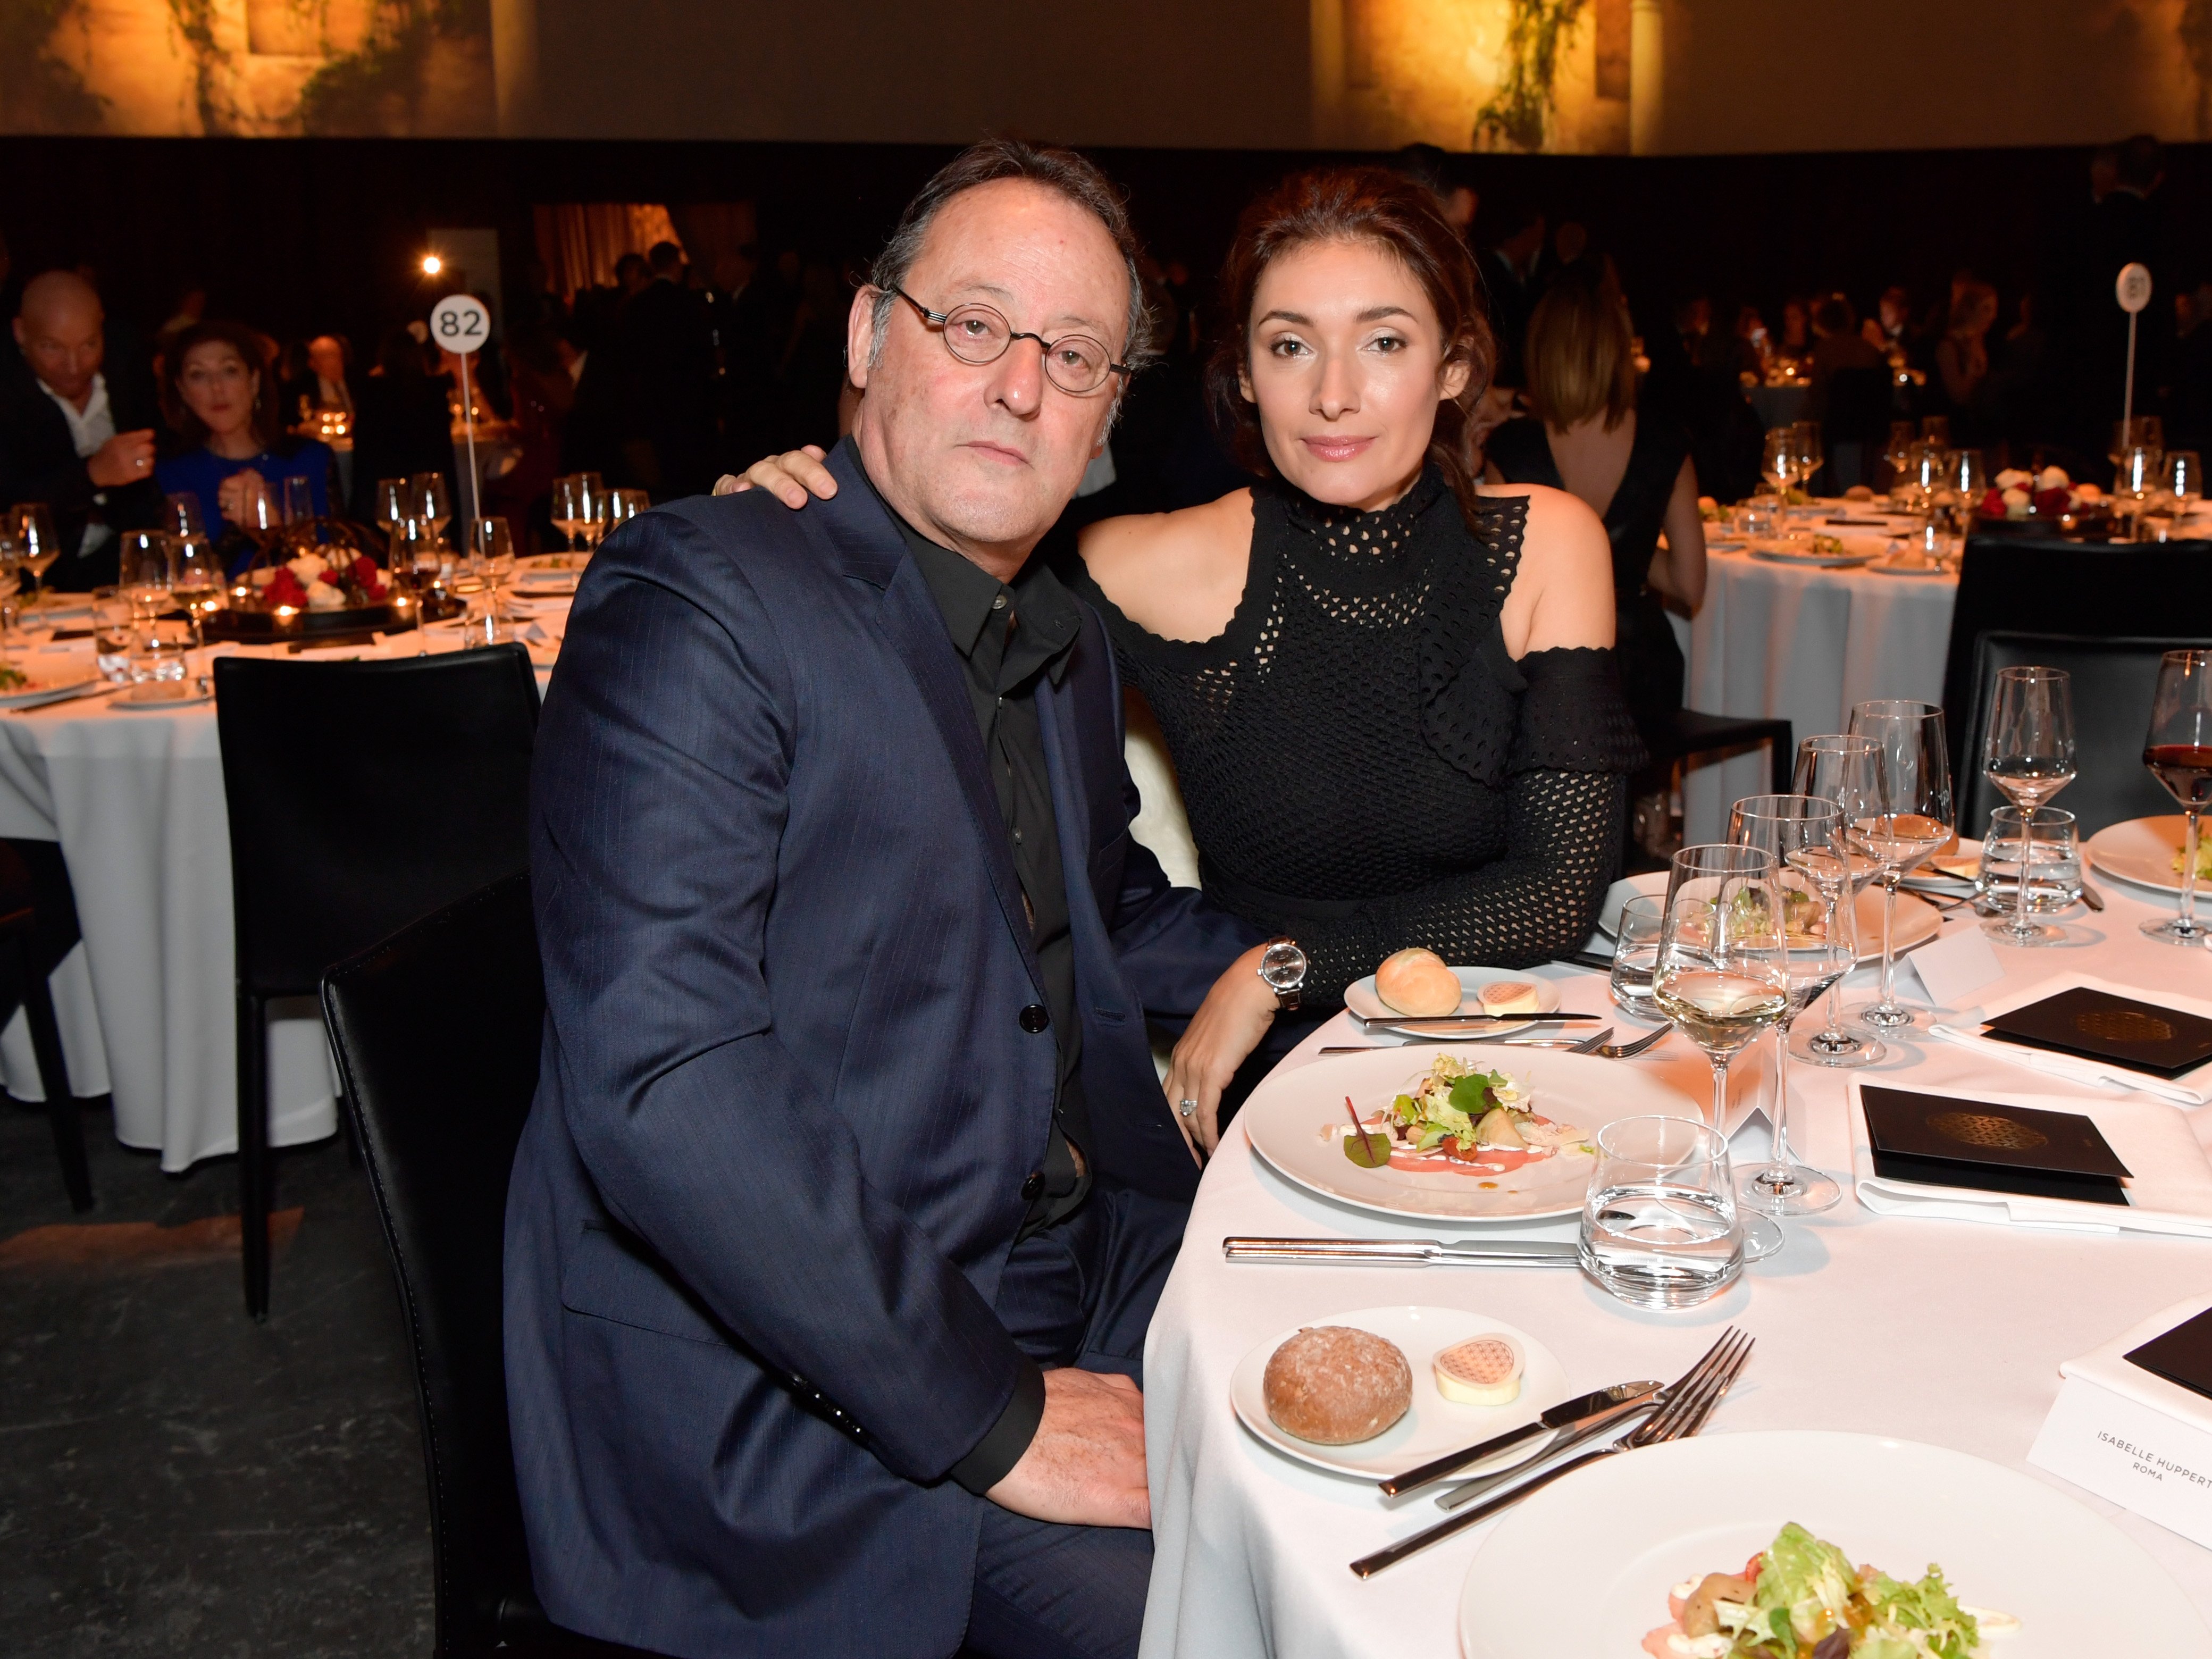 Jean Reno and Zofia Reno attend the IWC Schaffhausen "Decoding the Beauty of Time" Gala Dinner at the Salon International de la Haute Horlogerie (SIHH) on January 17, 2017 in Geneva. | Source: Getty Images